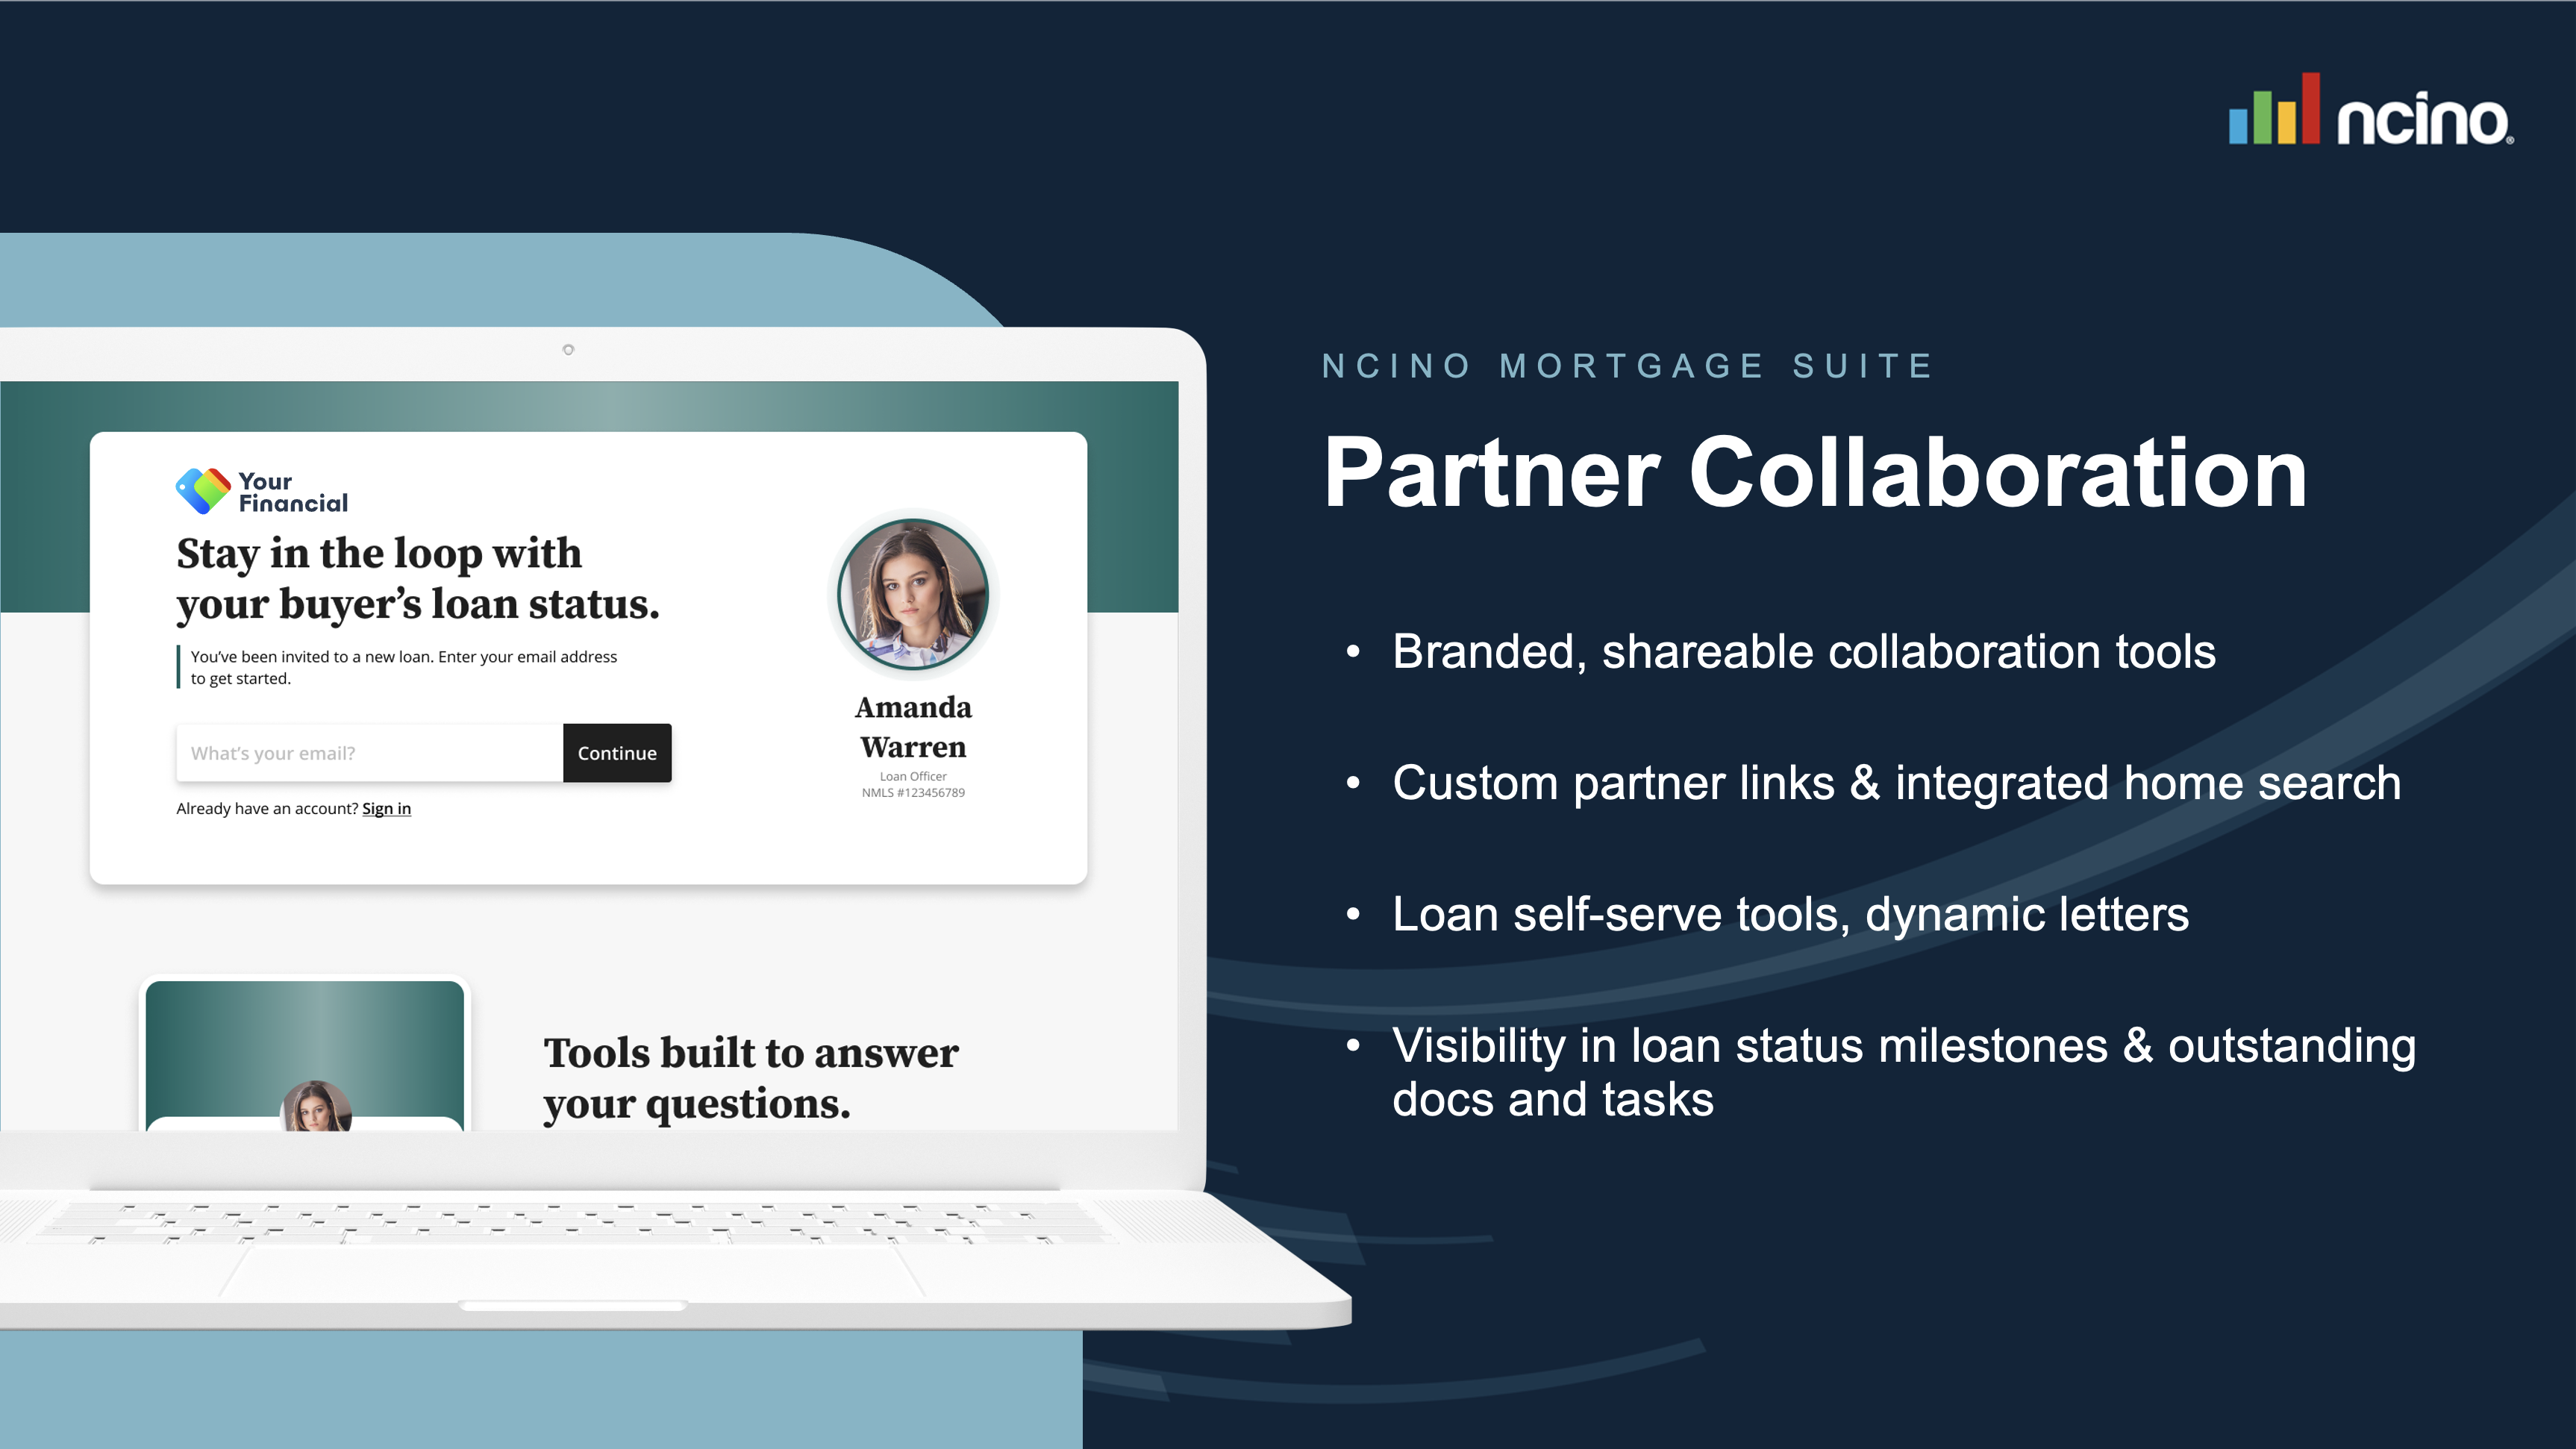 Grow referral network and collaborate with partners throughout the mortgage transaction.